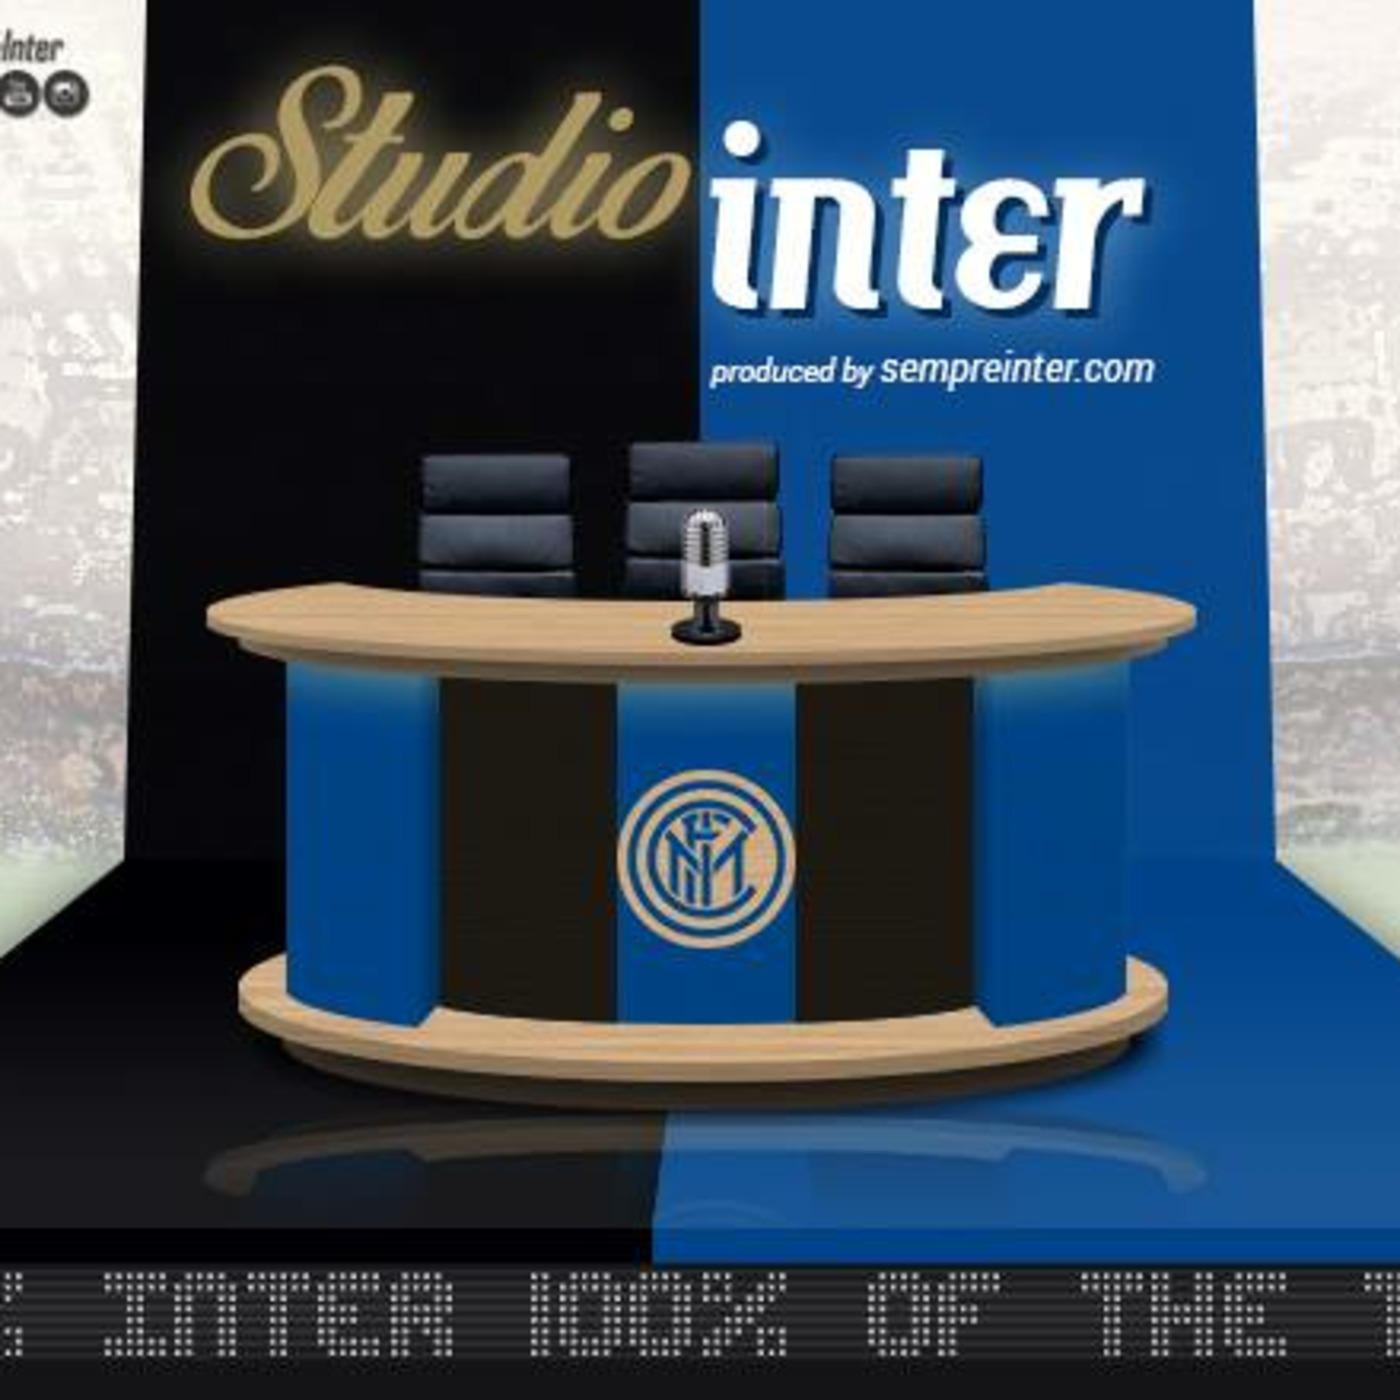 StudioInter Episode 74: ”Spalletti wiped the floor with Pioli”